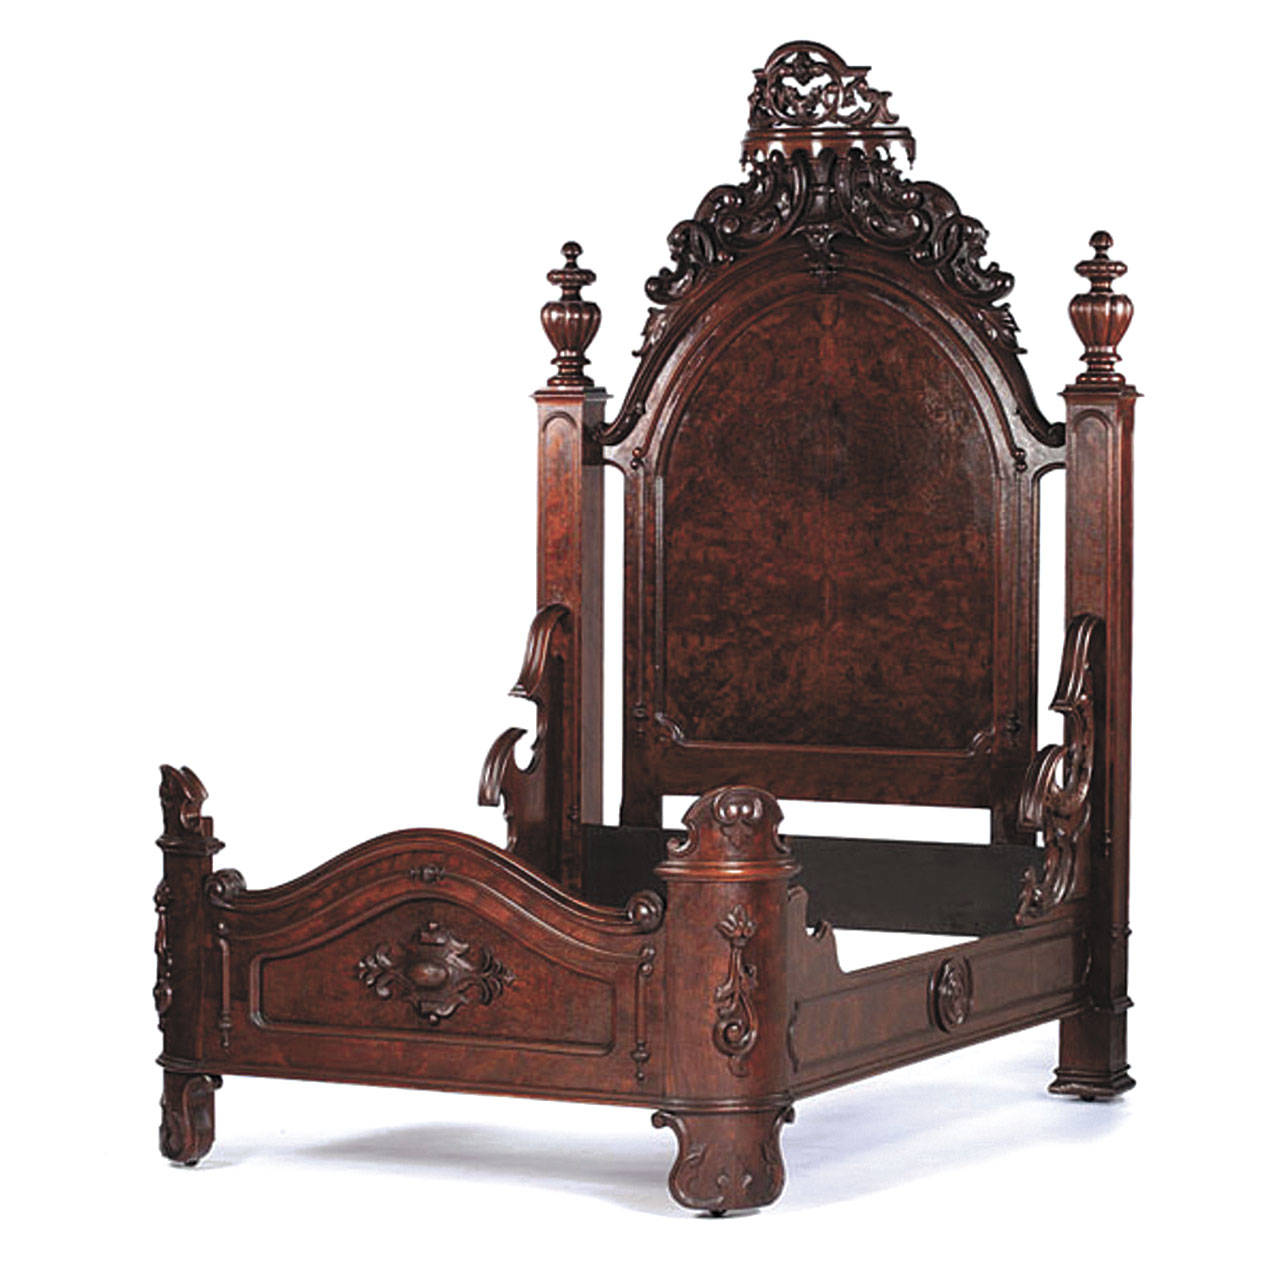 A set of furniture that would fill the bedroom sold for $5,400 at an auction in the Midwest. It was made from solid walnut with burl and carved trim. (Cowles Syndicate Inc.)